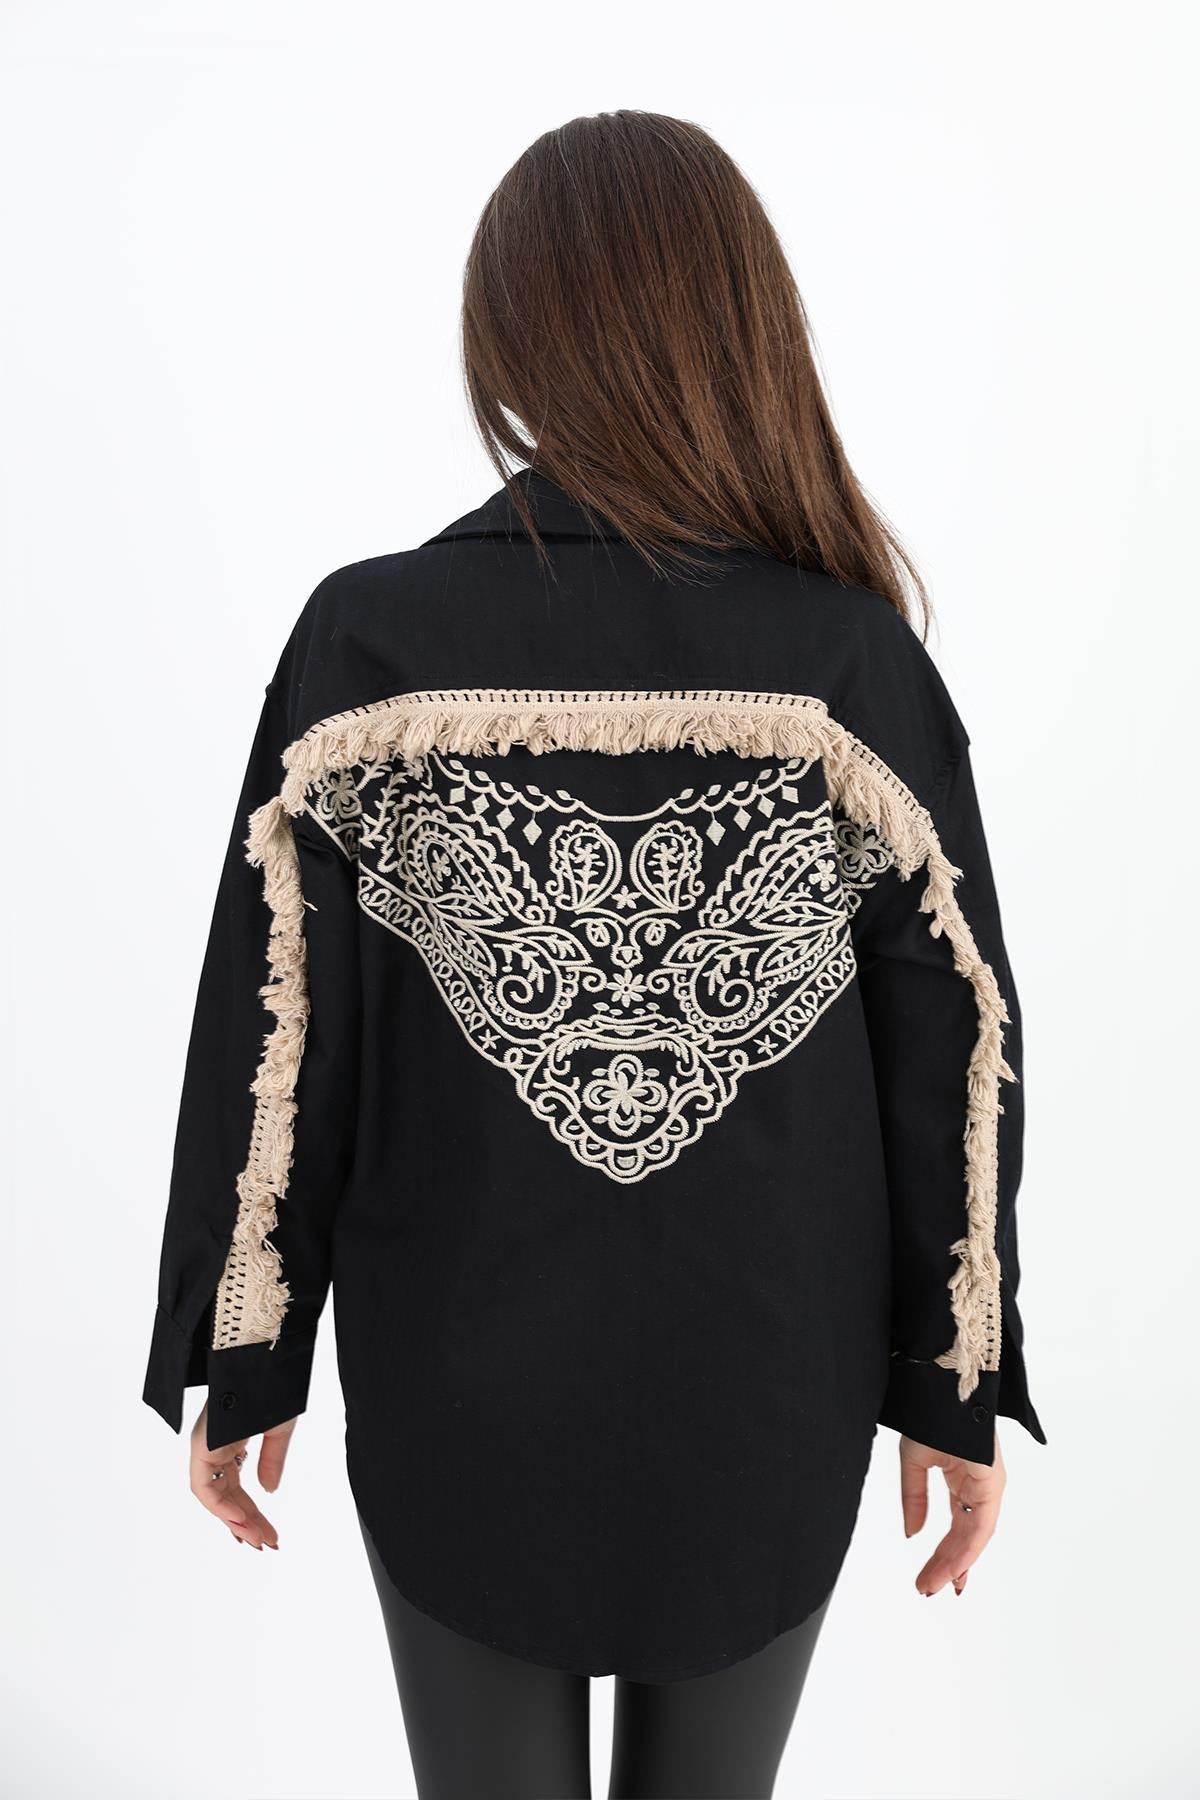 Women's Shirt Gabardine Embroidered on the Back with Tassels - Black - STREETMODE ™